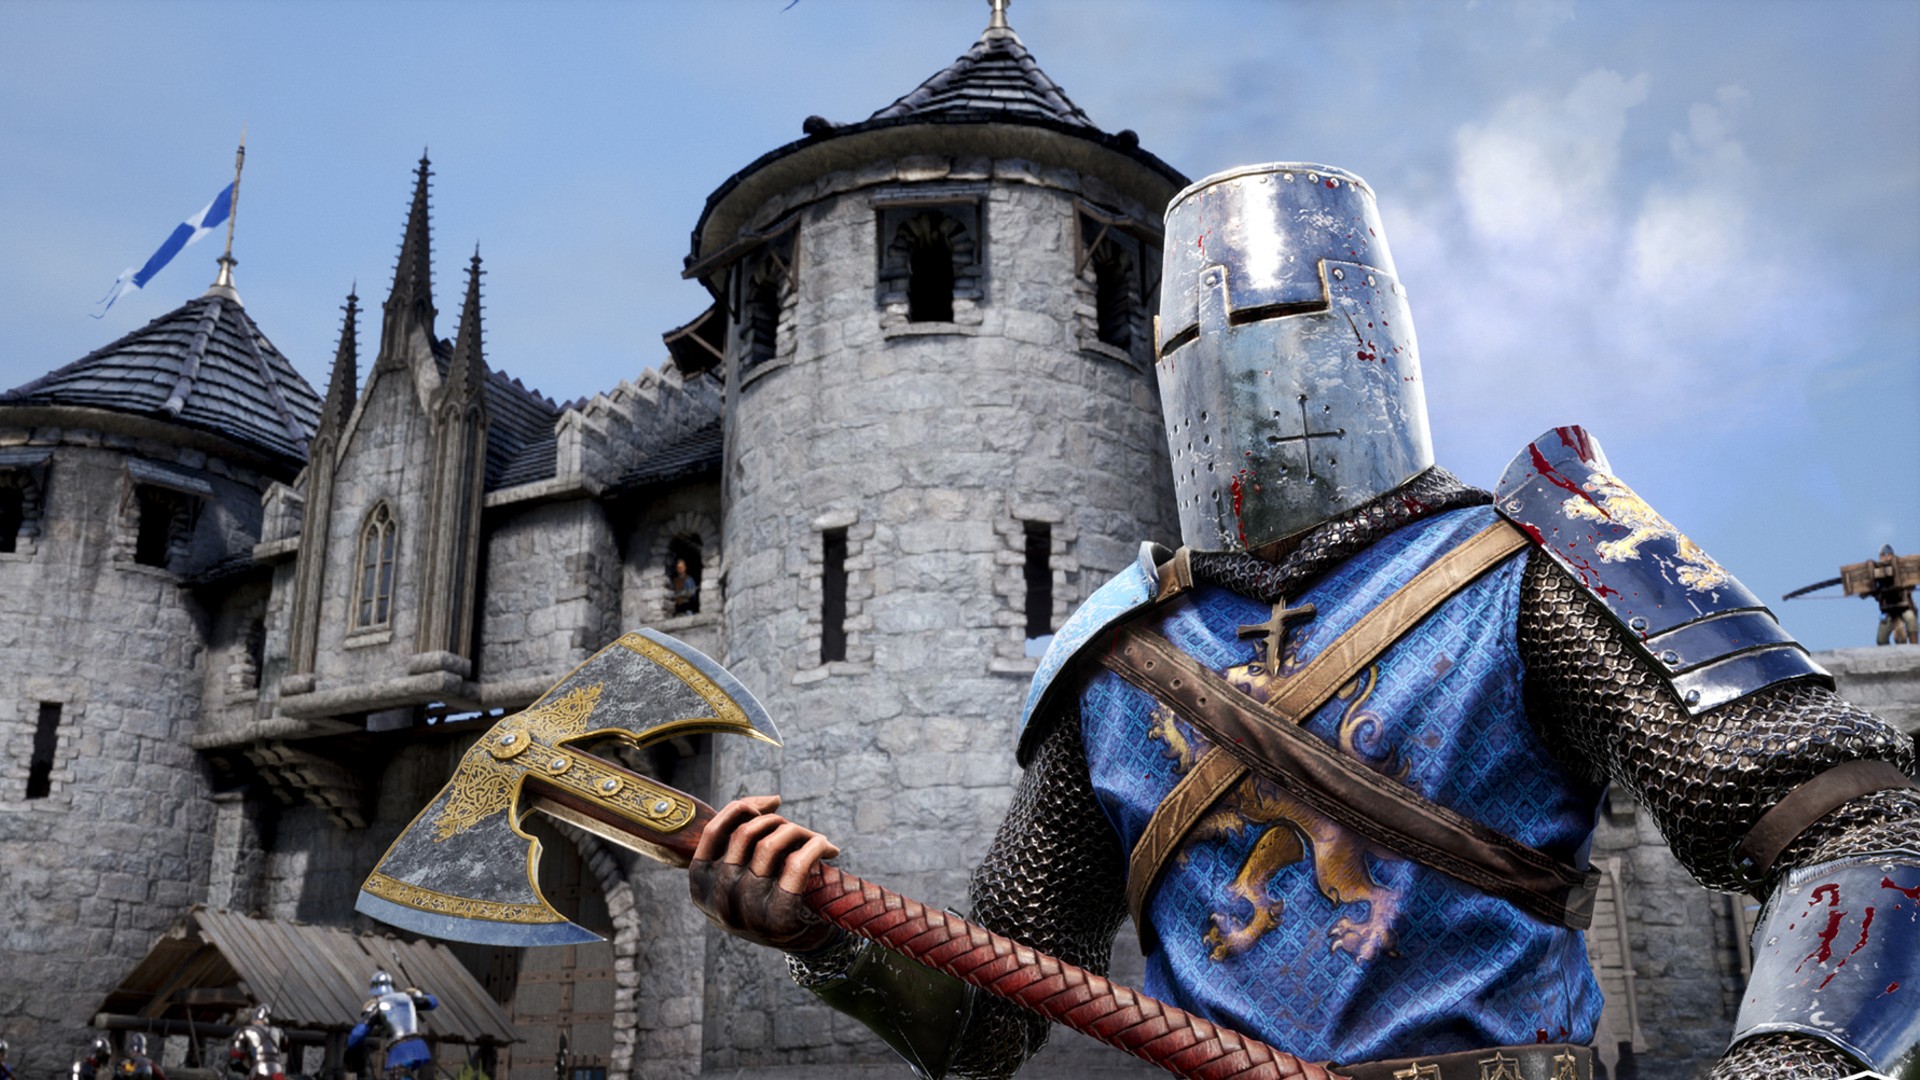  Chivalry 2 DLSS update promises 4K 60 fps dismemberment action on any Geforce RTX GPU 